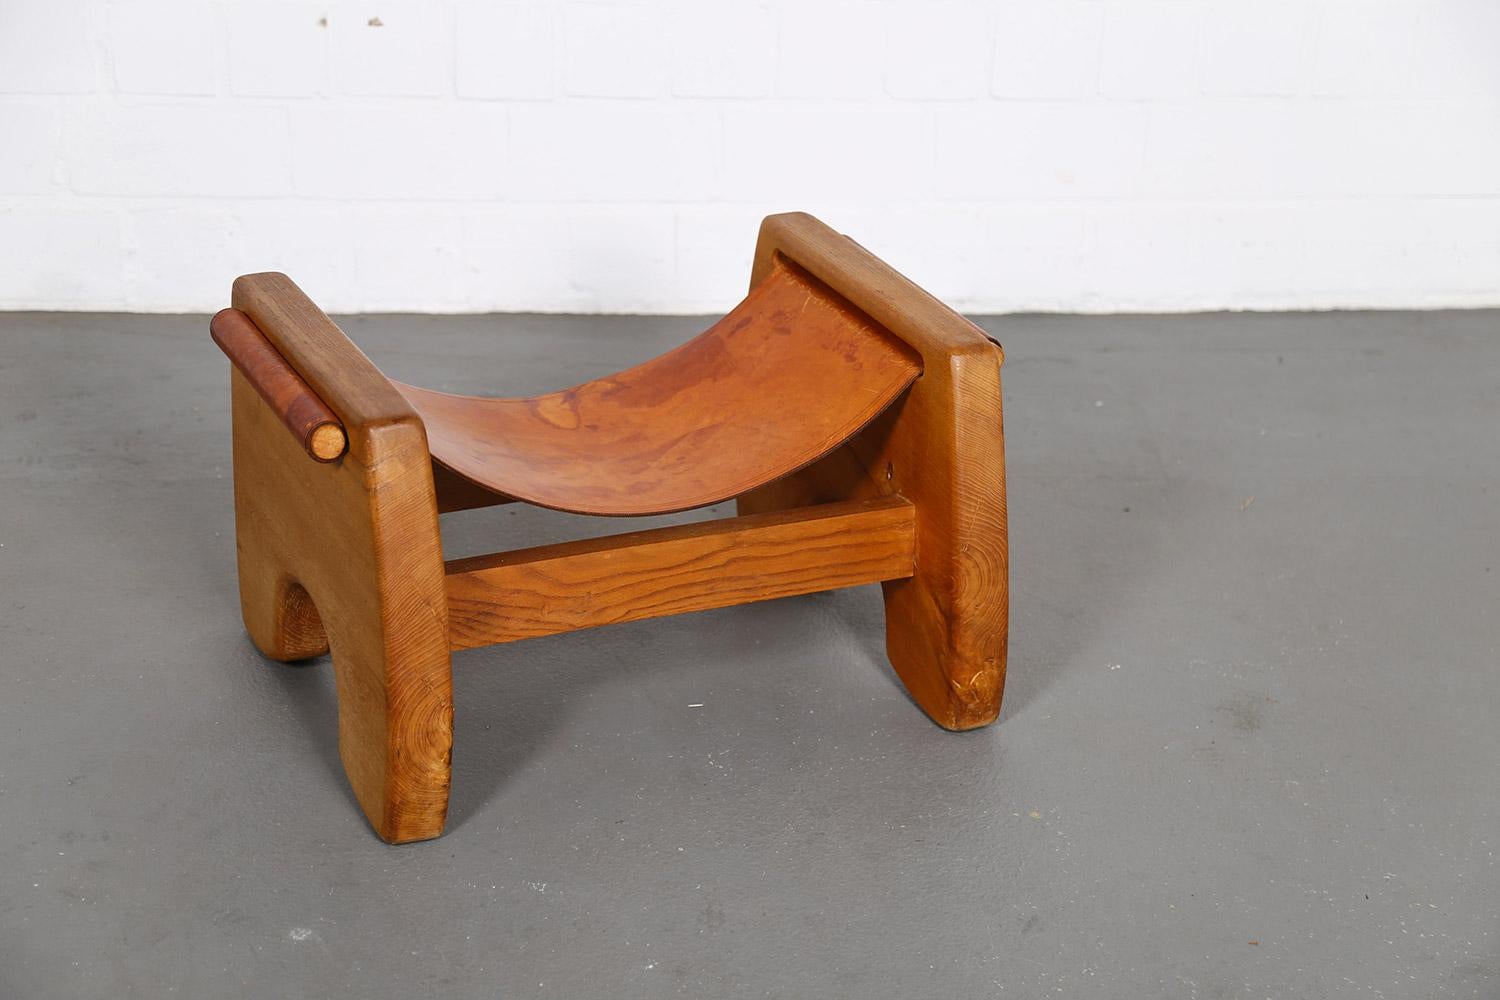 Mid-20th Century Rare French Oak and Cognac Leather Stool 30s or 40s Design For Sale